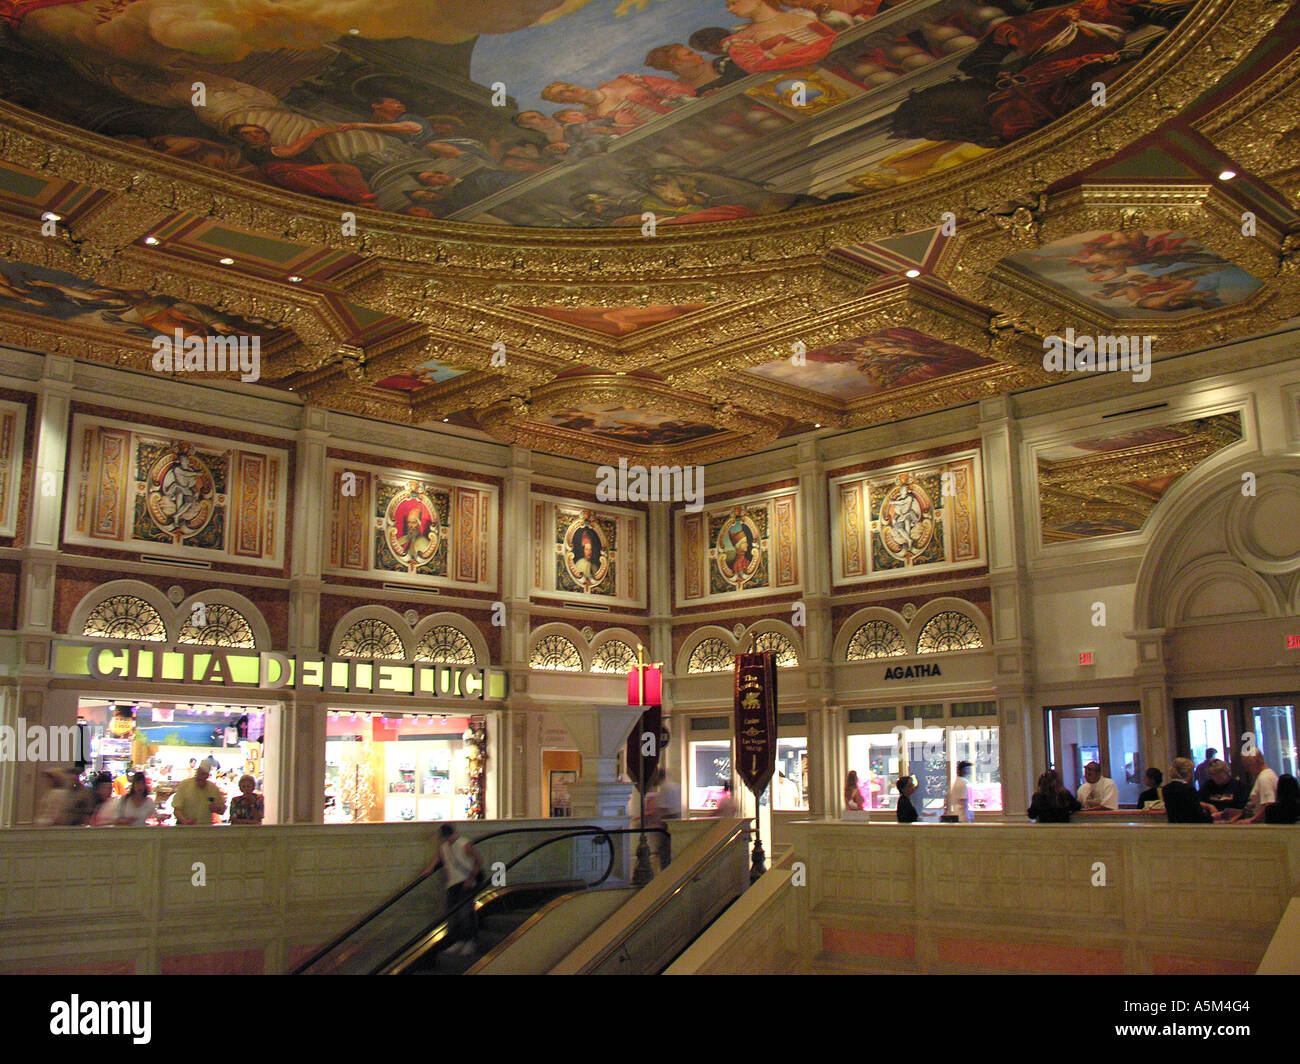 Las Vegas Venetian Hotel and Casino colorful ceiling painting Stock